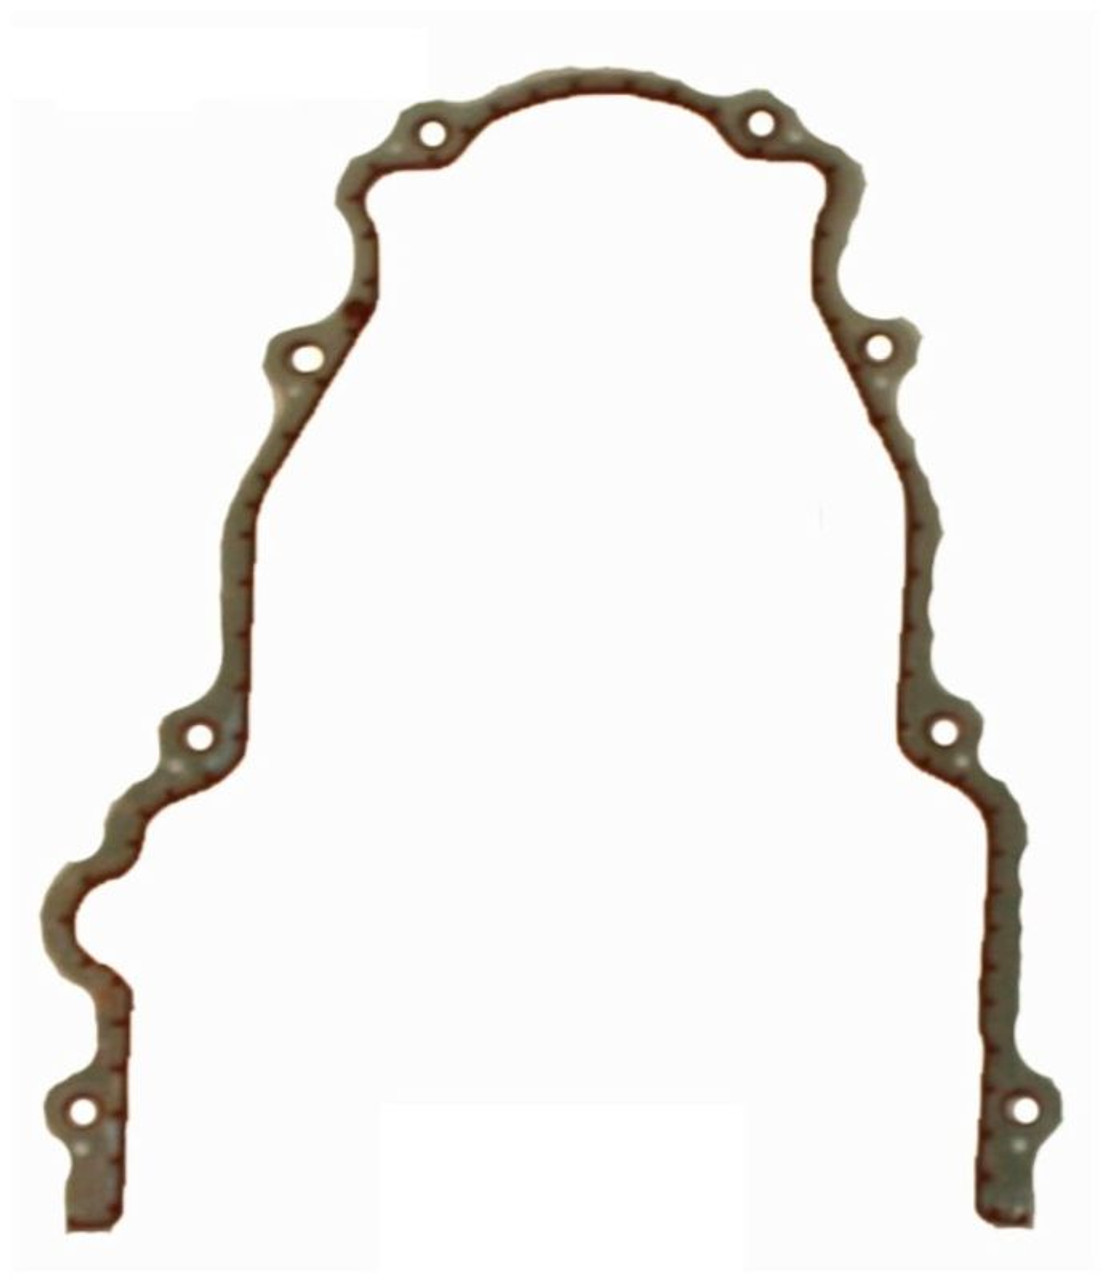 2002 Chevrolet Tahoe 4.8L Engine Timing Cover Gasket TCG293-A -85